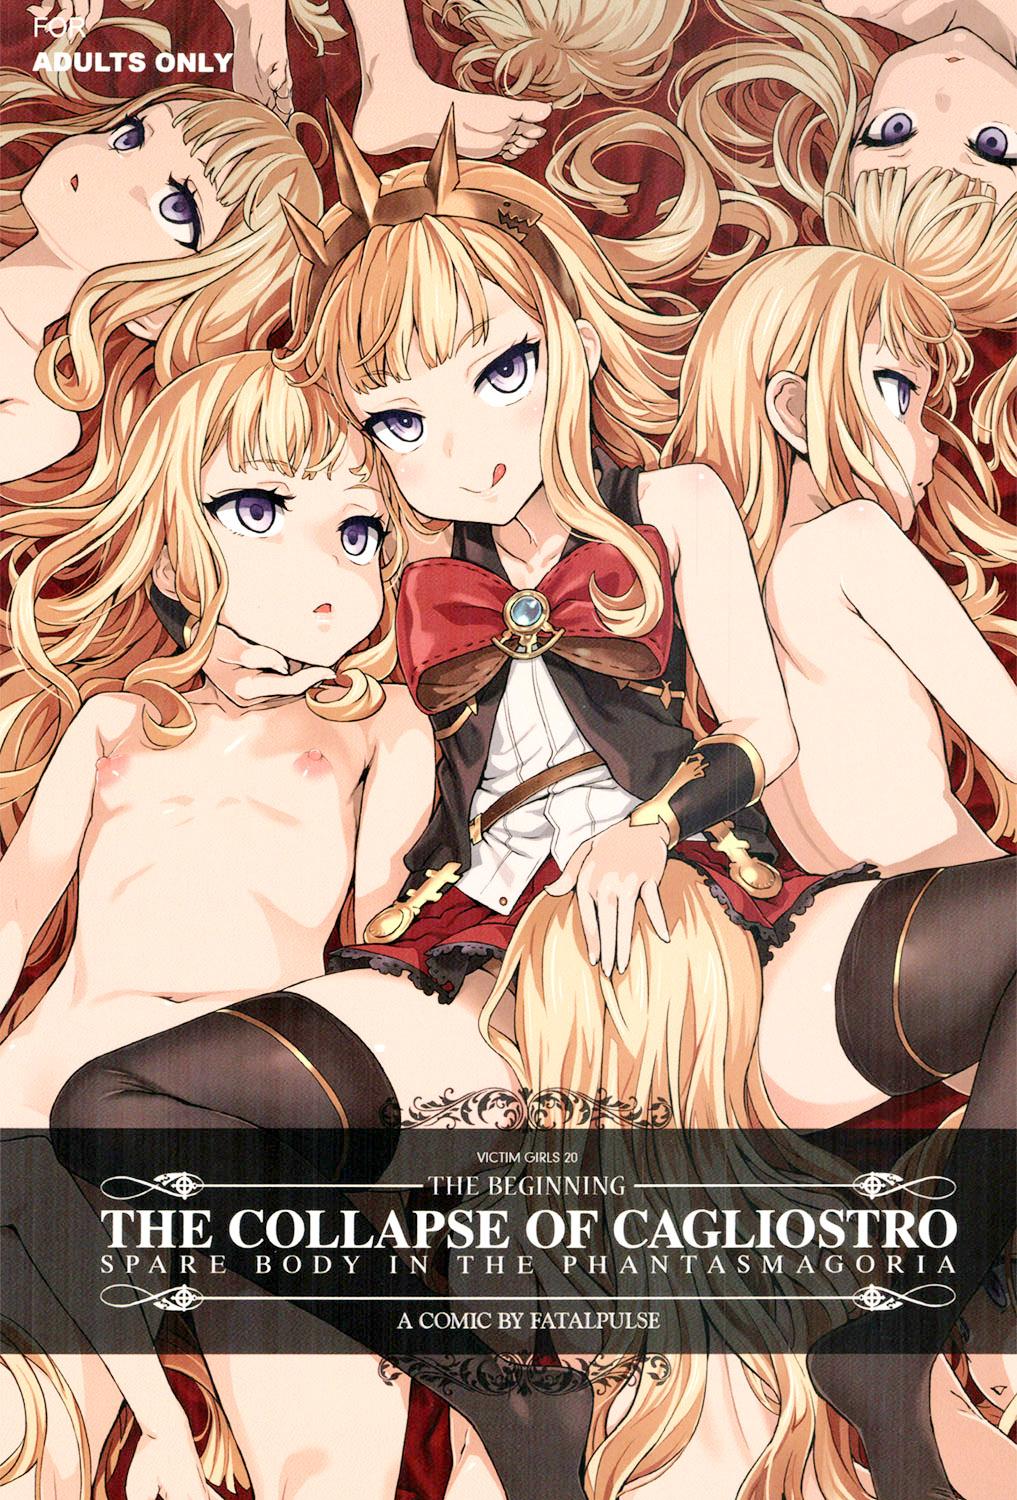 Amateur Victim Girls 20 THE COLLAPSE OF CAGLIOSTRO - Granblue fantasy Pussyfucking - Page 2